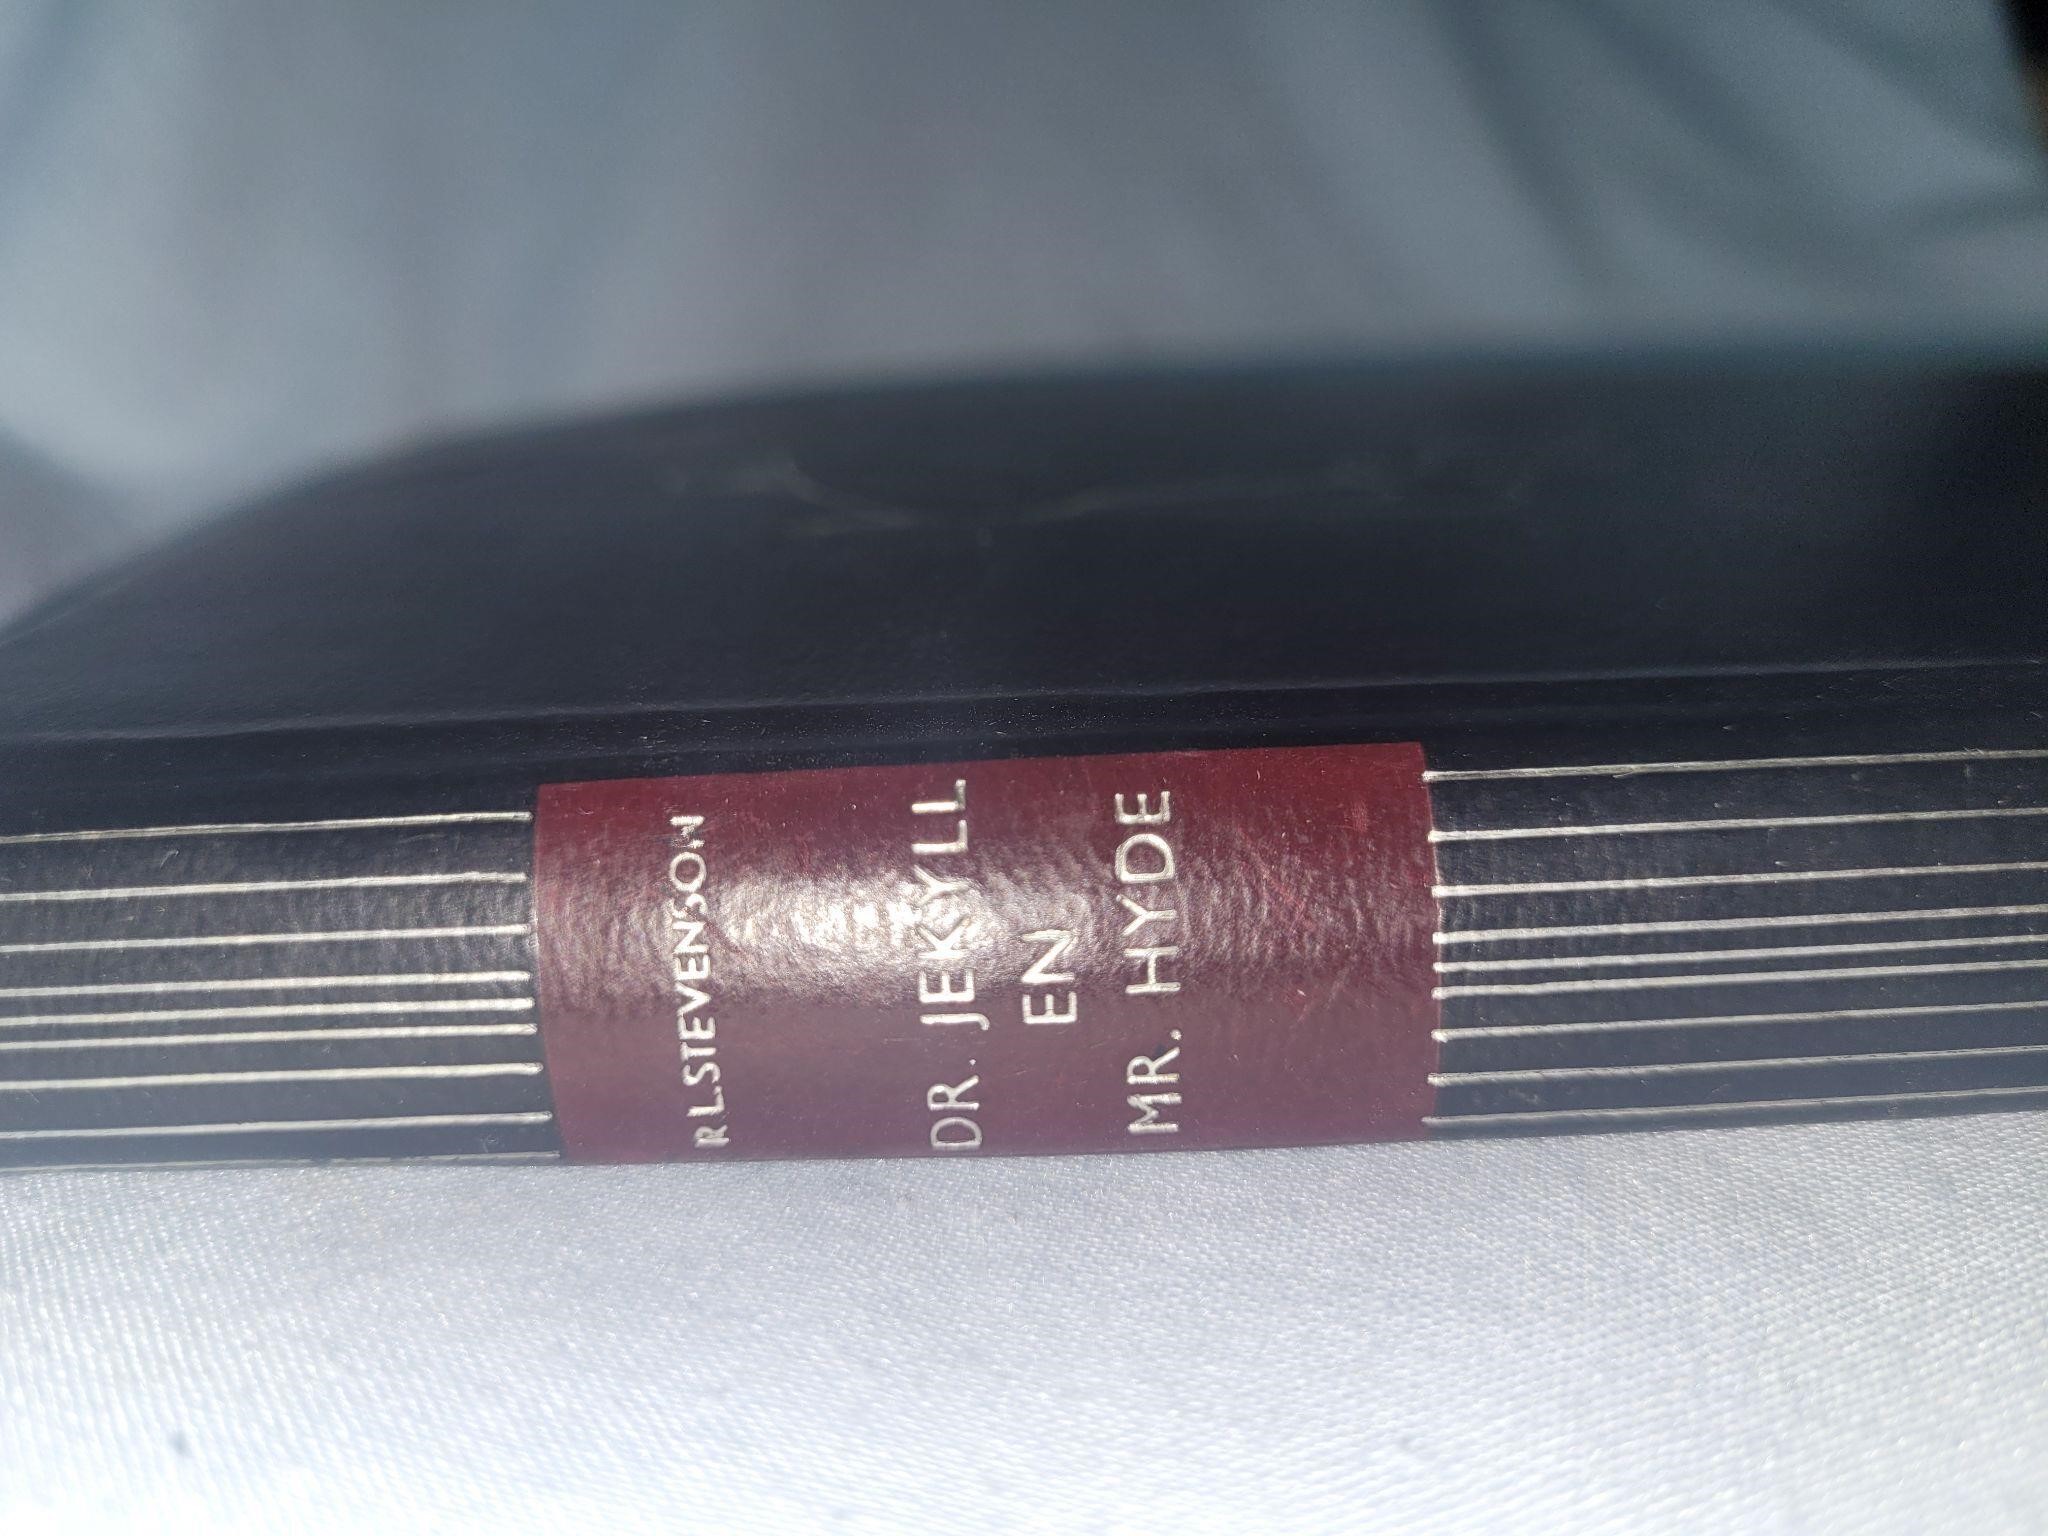 Jekyll and mr hyde old book